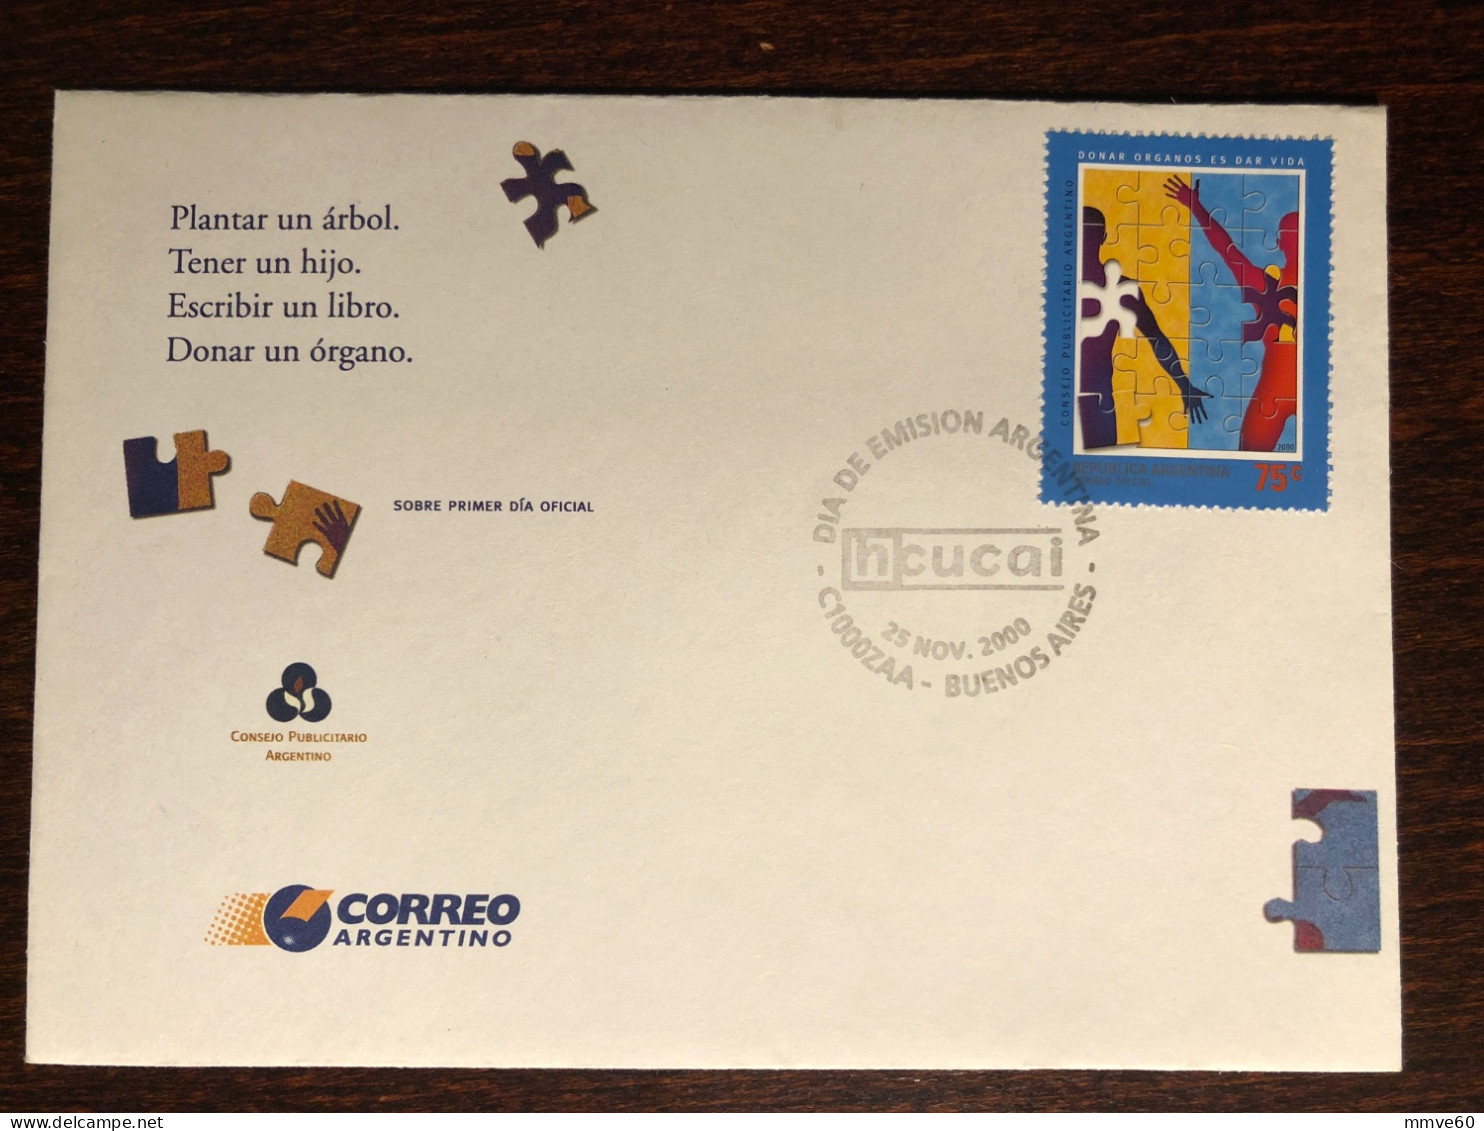 ARGENTINA FDC COVER 2000 YEAR ORGAN DONATION HEALTH MEDICINE STAMPS - FDC